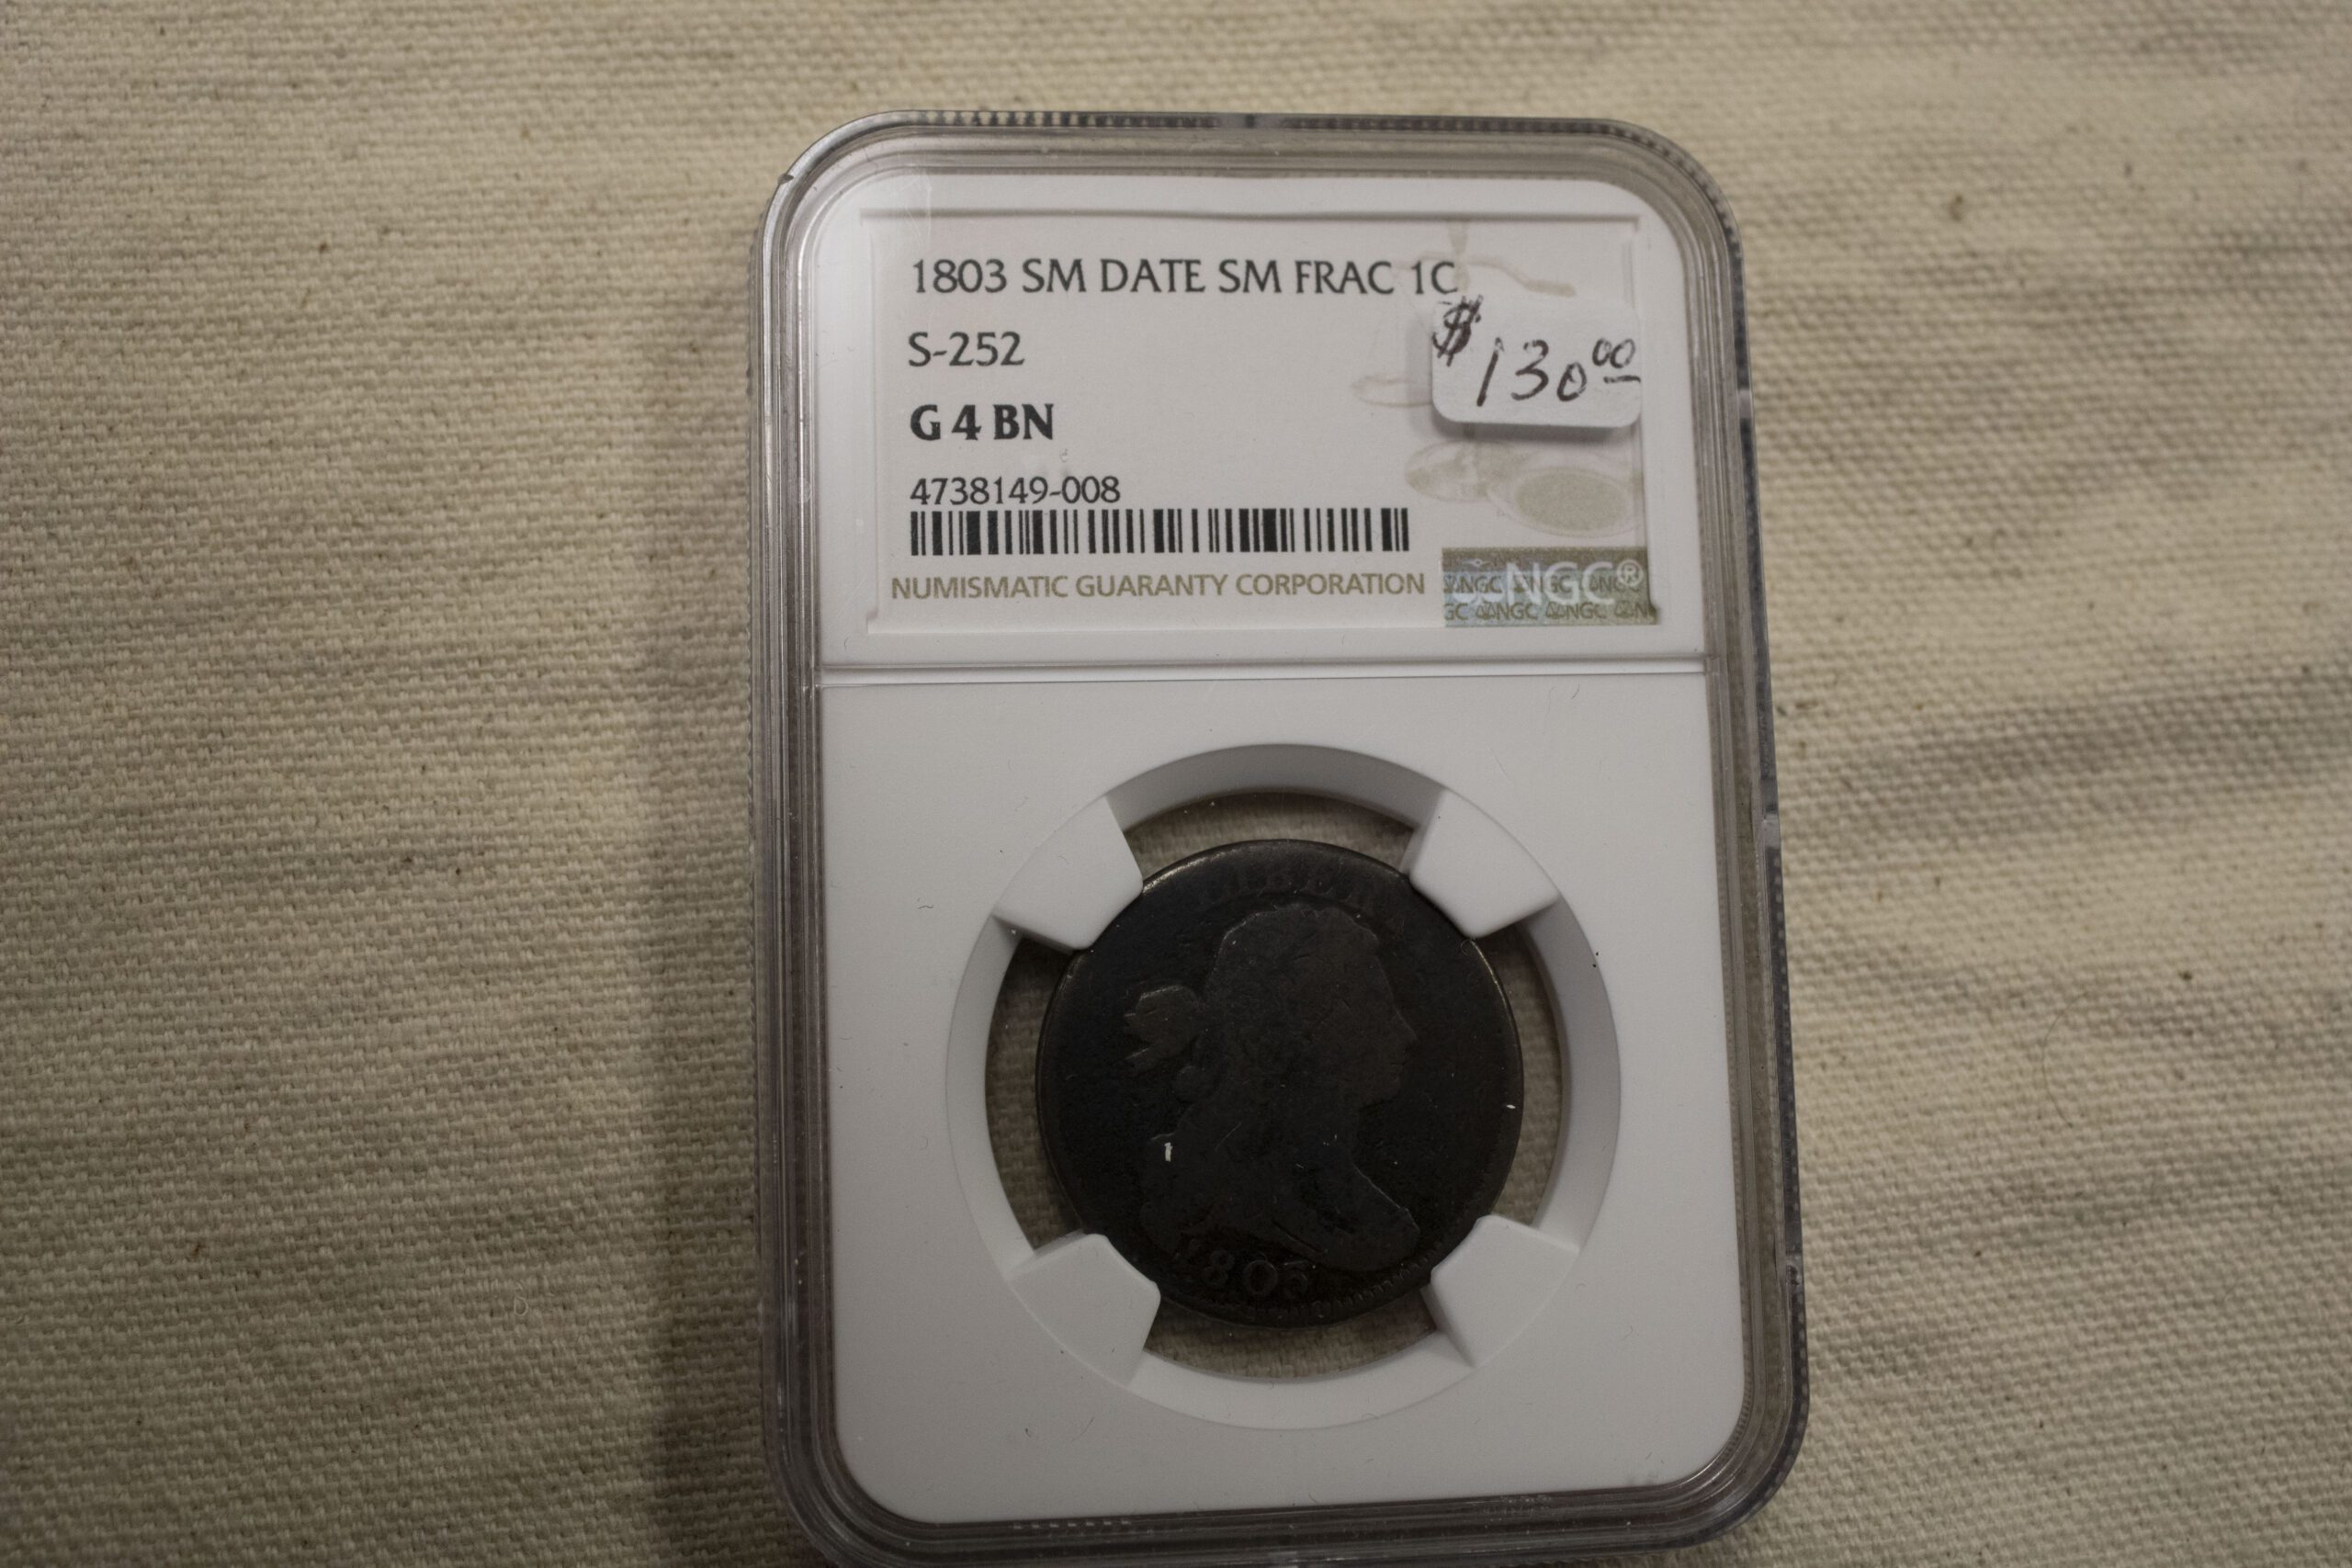 1803 SM Date SM Frac 1C S-252 G 4 BN NGC Certified (CHECK PLEASE)